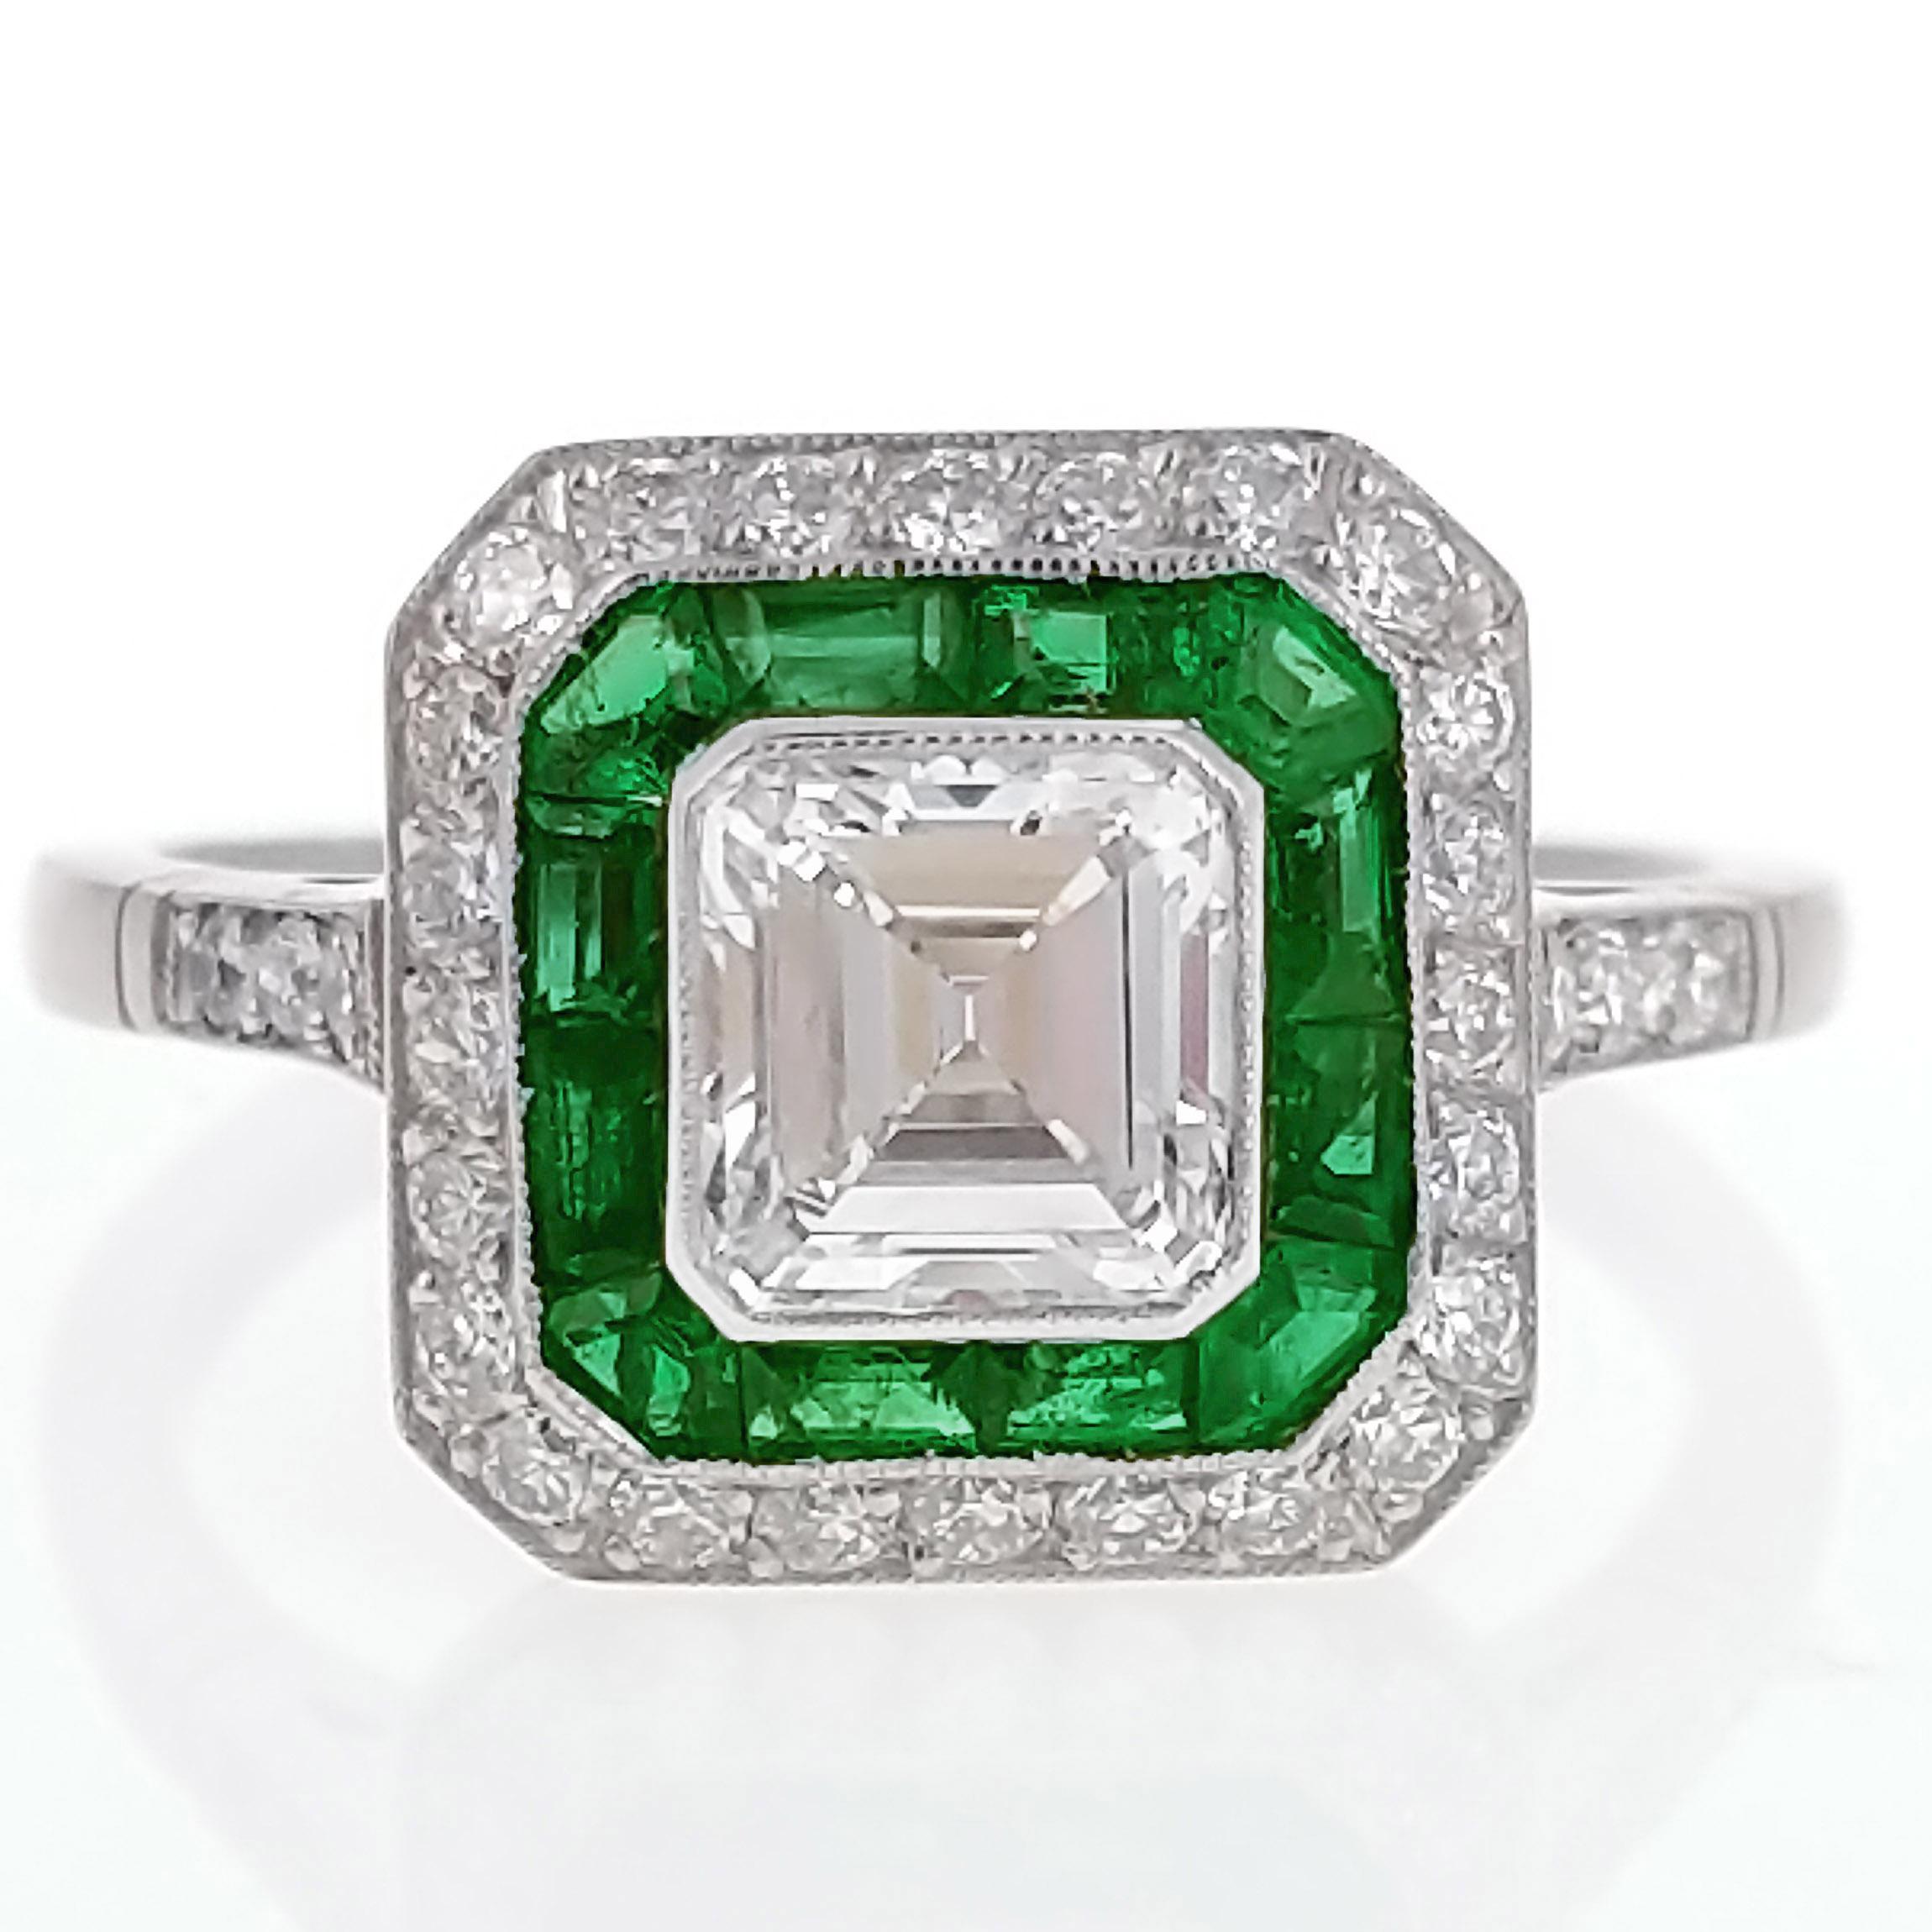 This Art Deco style ring features a 1.03 asscher-cut diamond with a surround of lively calibre-cut emeralds. It is further set by a halo of old-European cut diamonds for an additional weight of approximately .3 carat. The ring is expertly crafted in